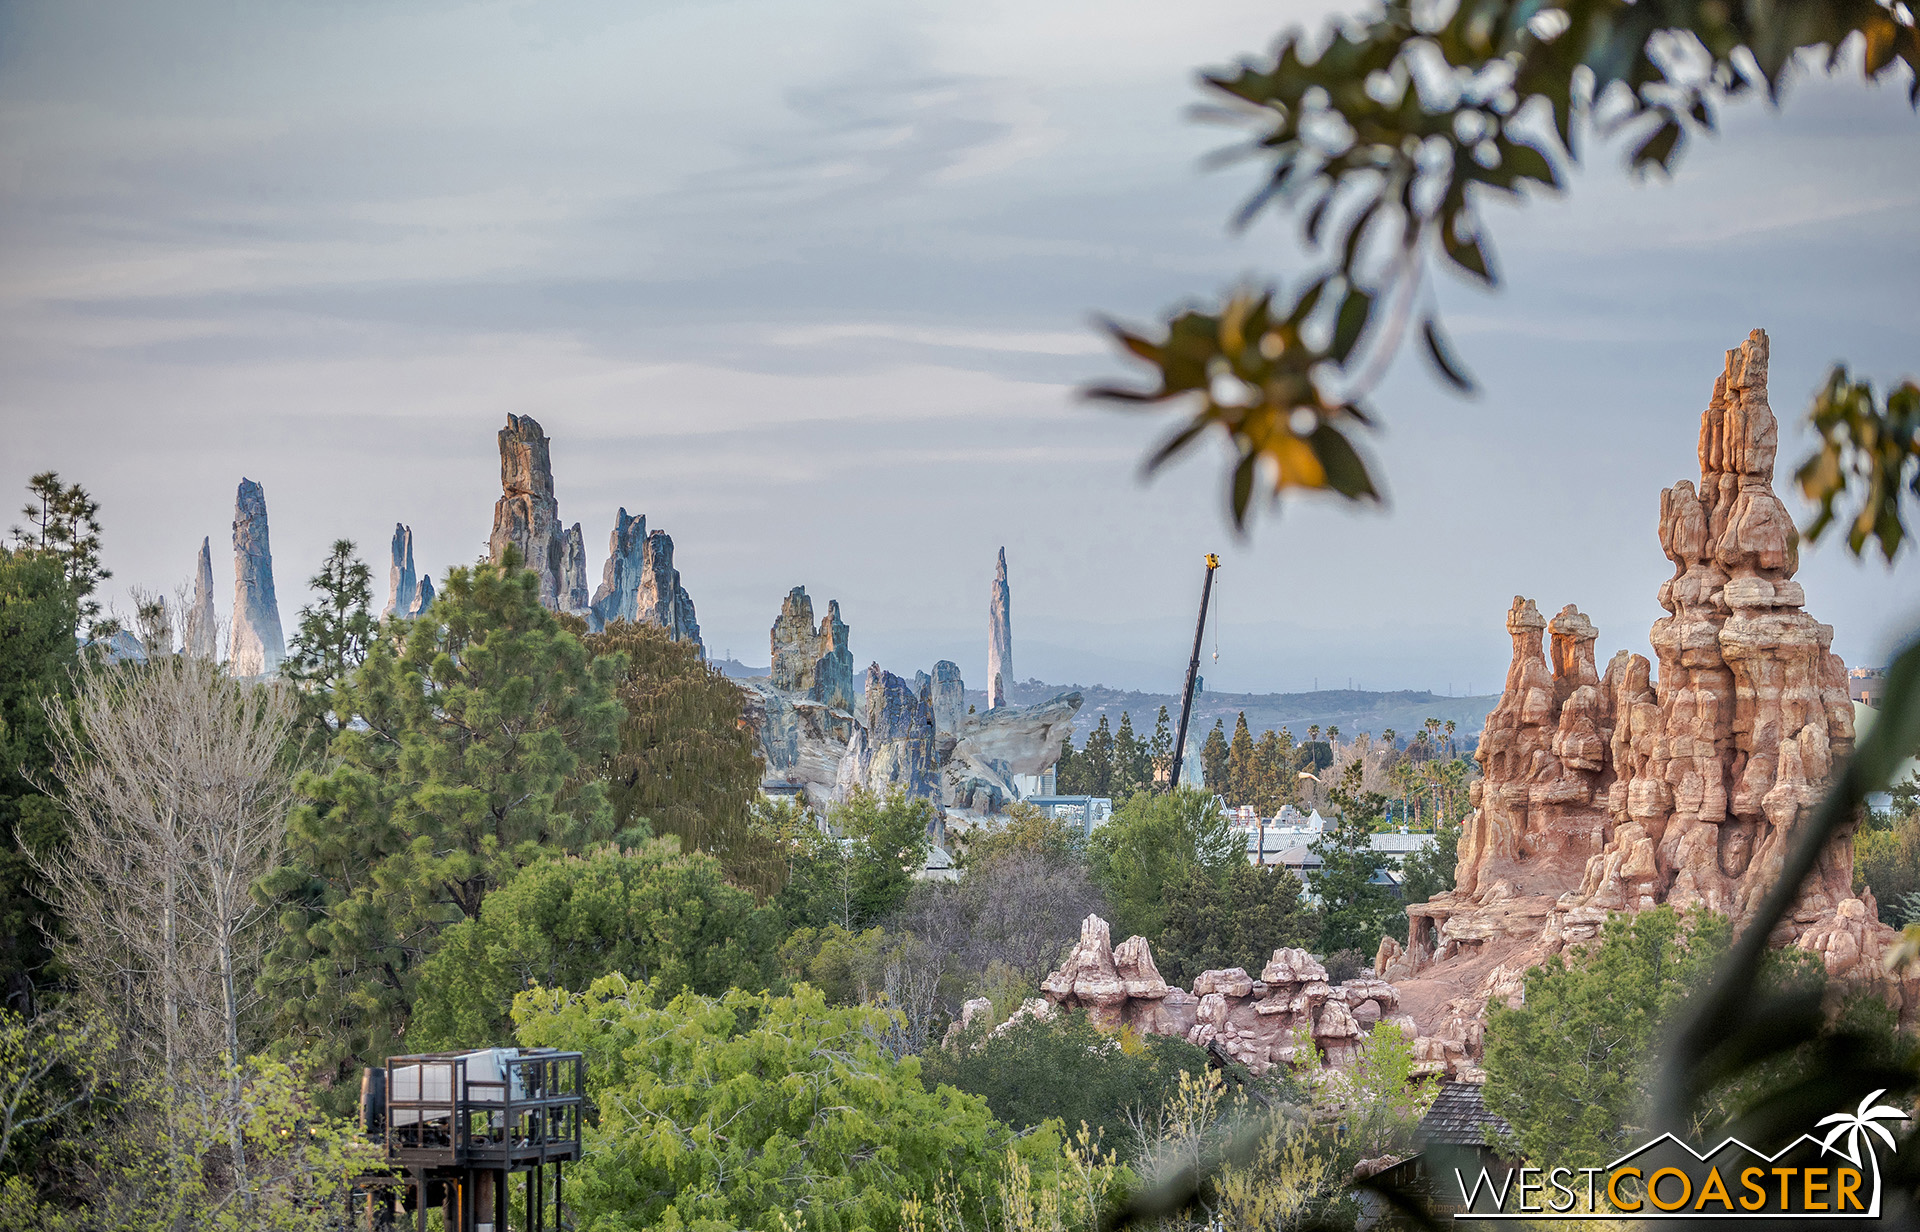  We’ll close out with some views from Tarzan’s Treehouse. 